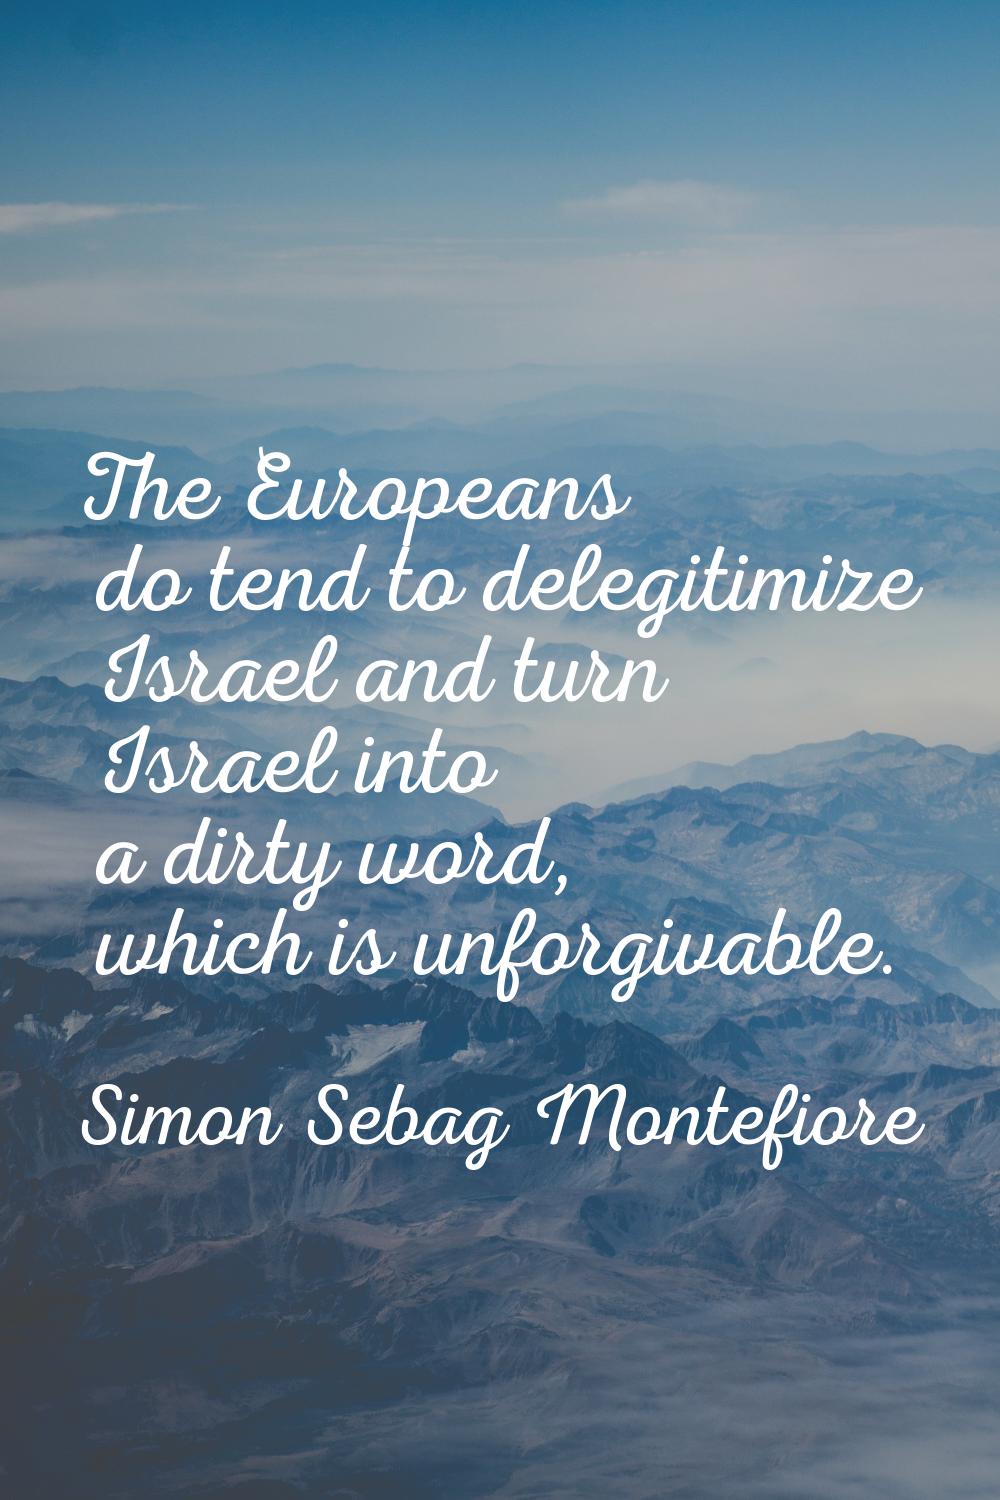 The Europeans do tend to delegitimize Israel and turn Israel into a dirty word, which is unforgivab